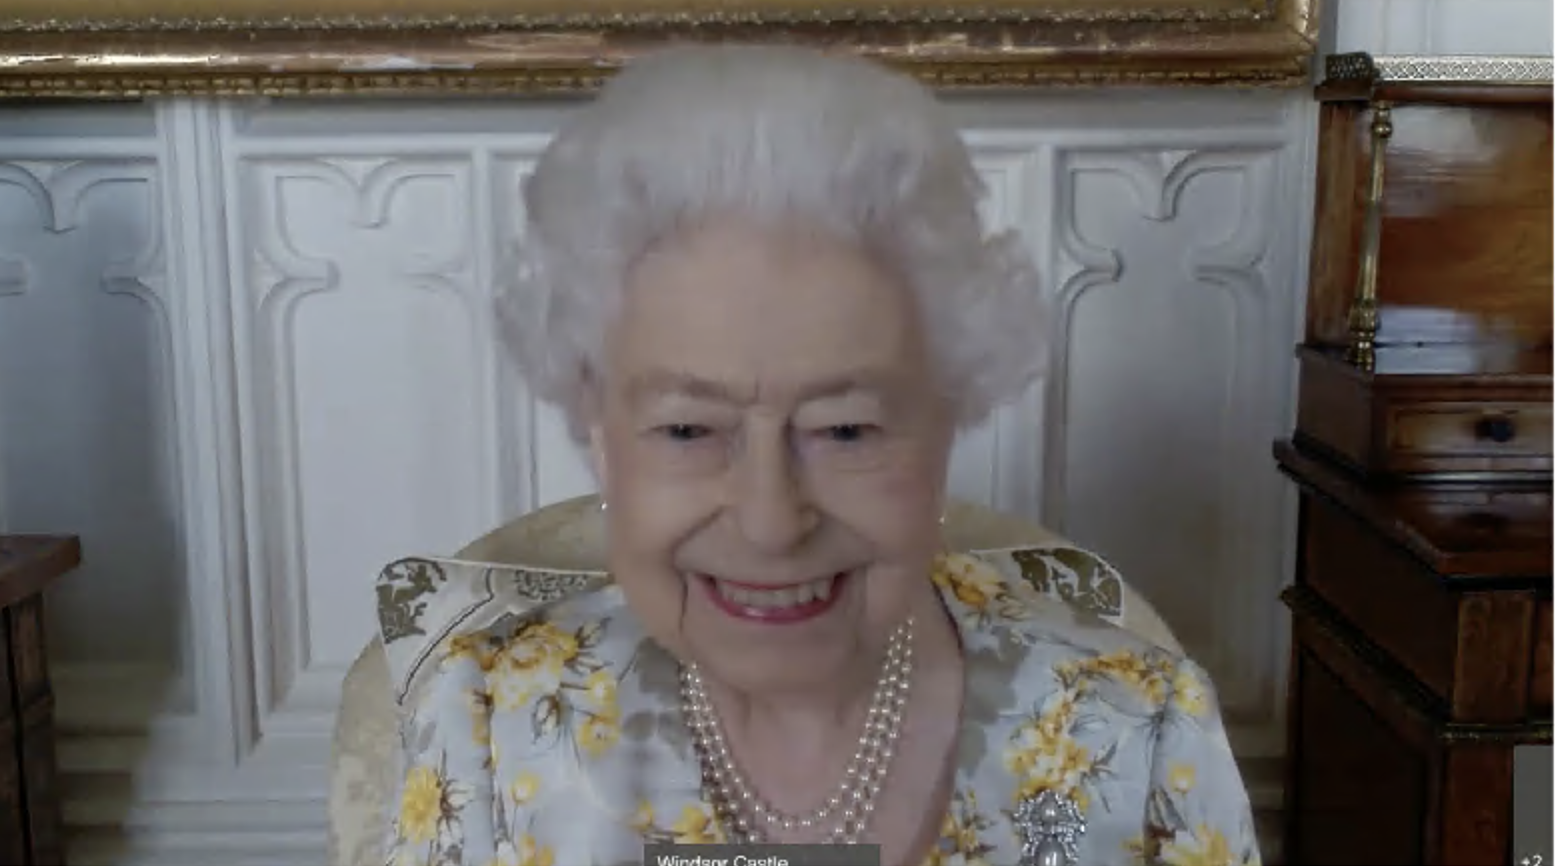 The Queen reveals Covid left her very tired and exhausted